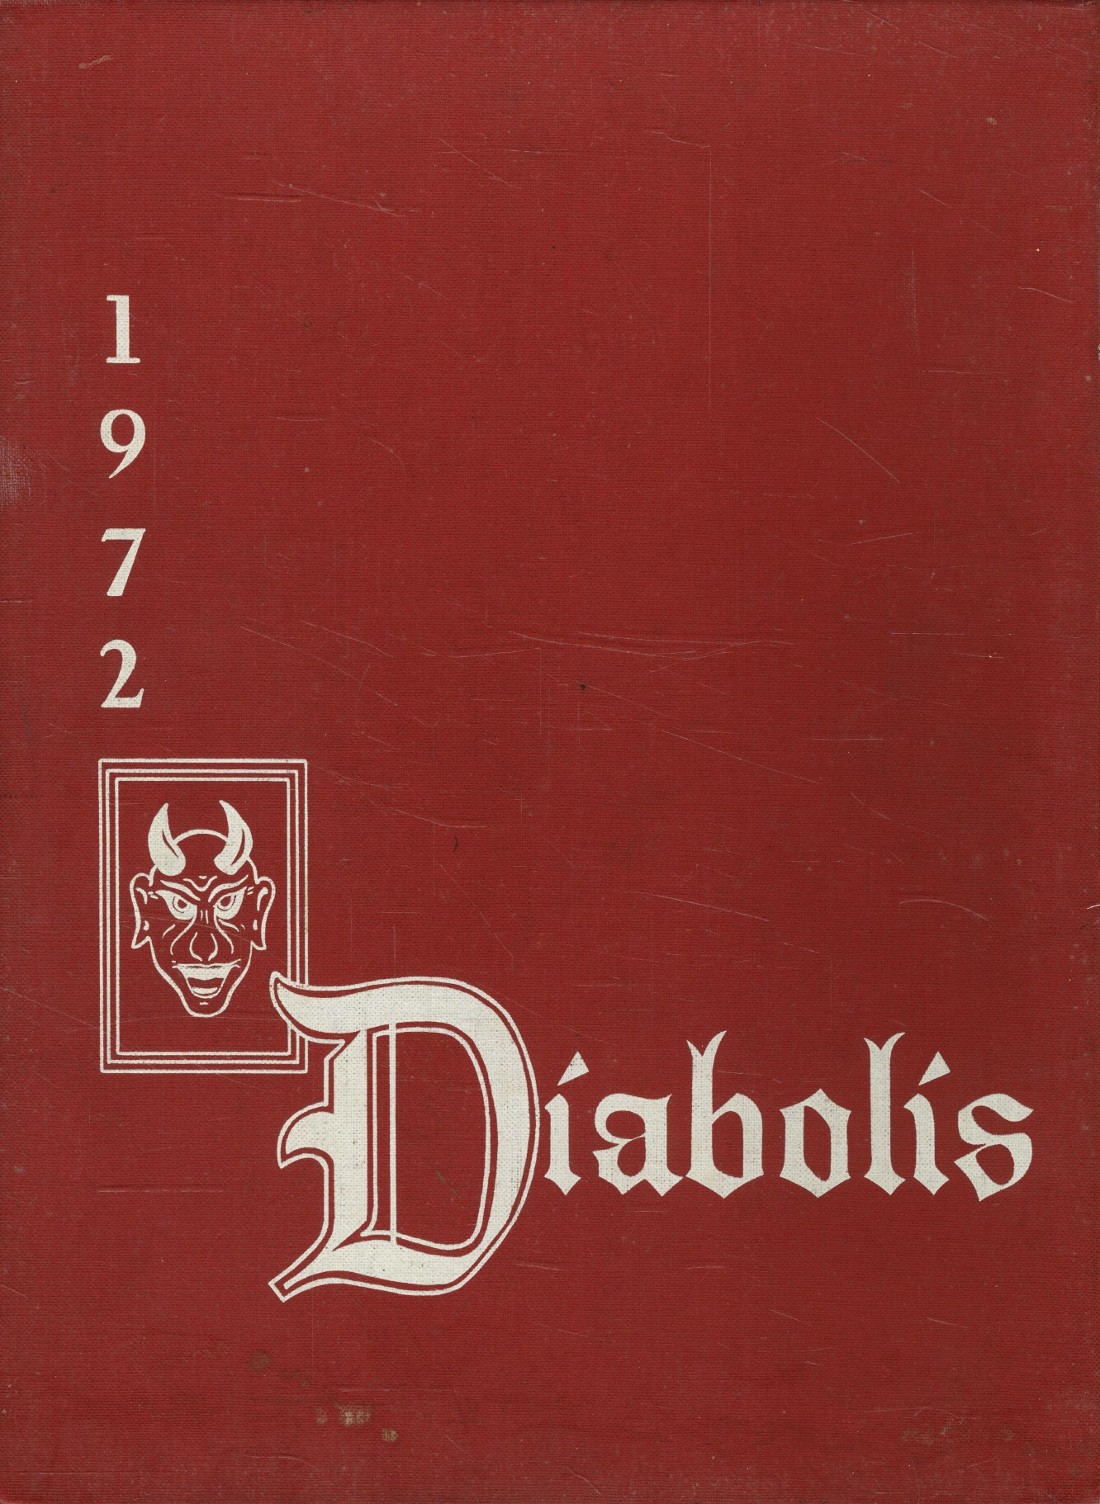 1972 yearbook from MarionFranklin High School from Columbus, Ohio